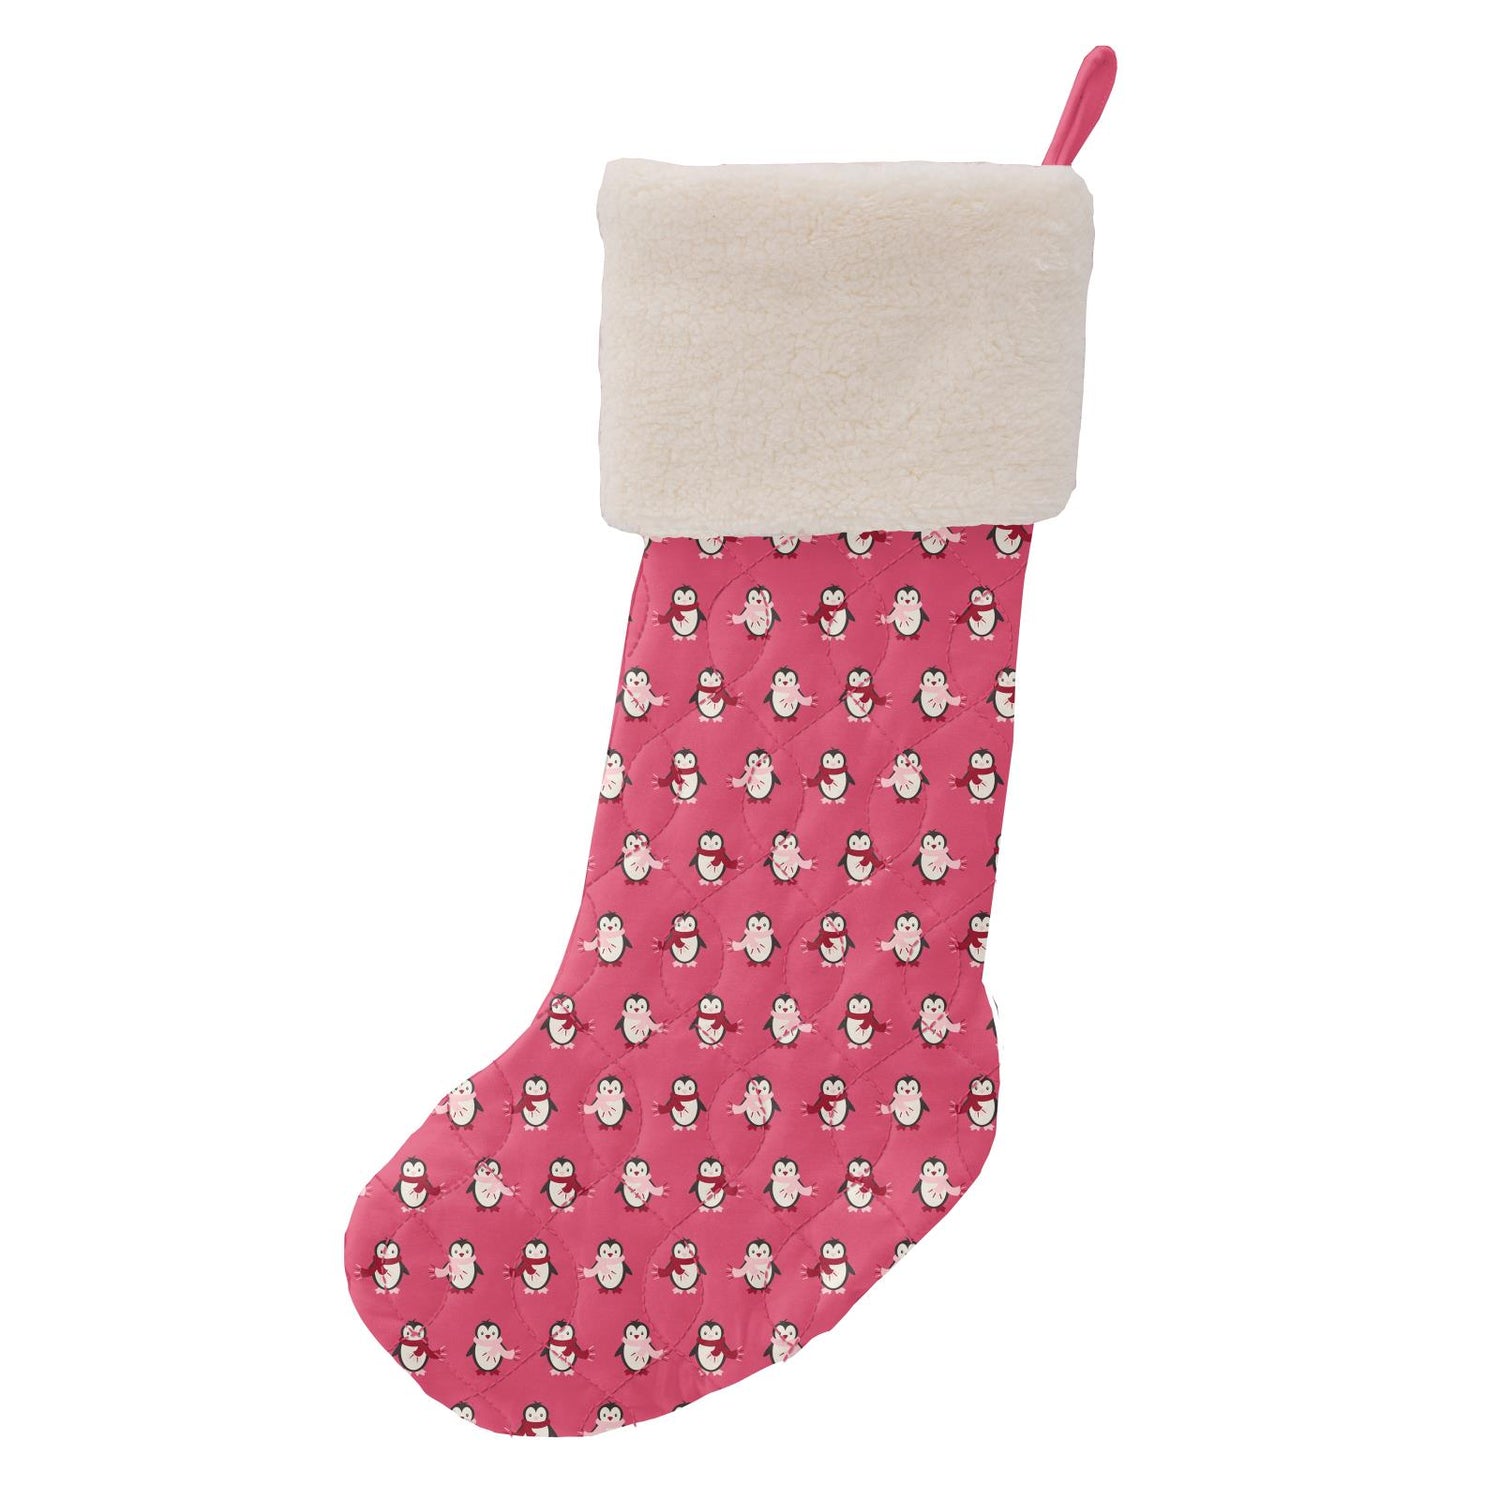 Quilted Stocking in Winter Rose Penguins/Natural Holiday Lights